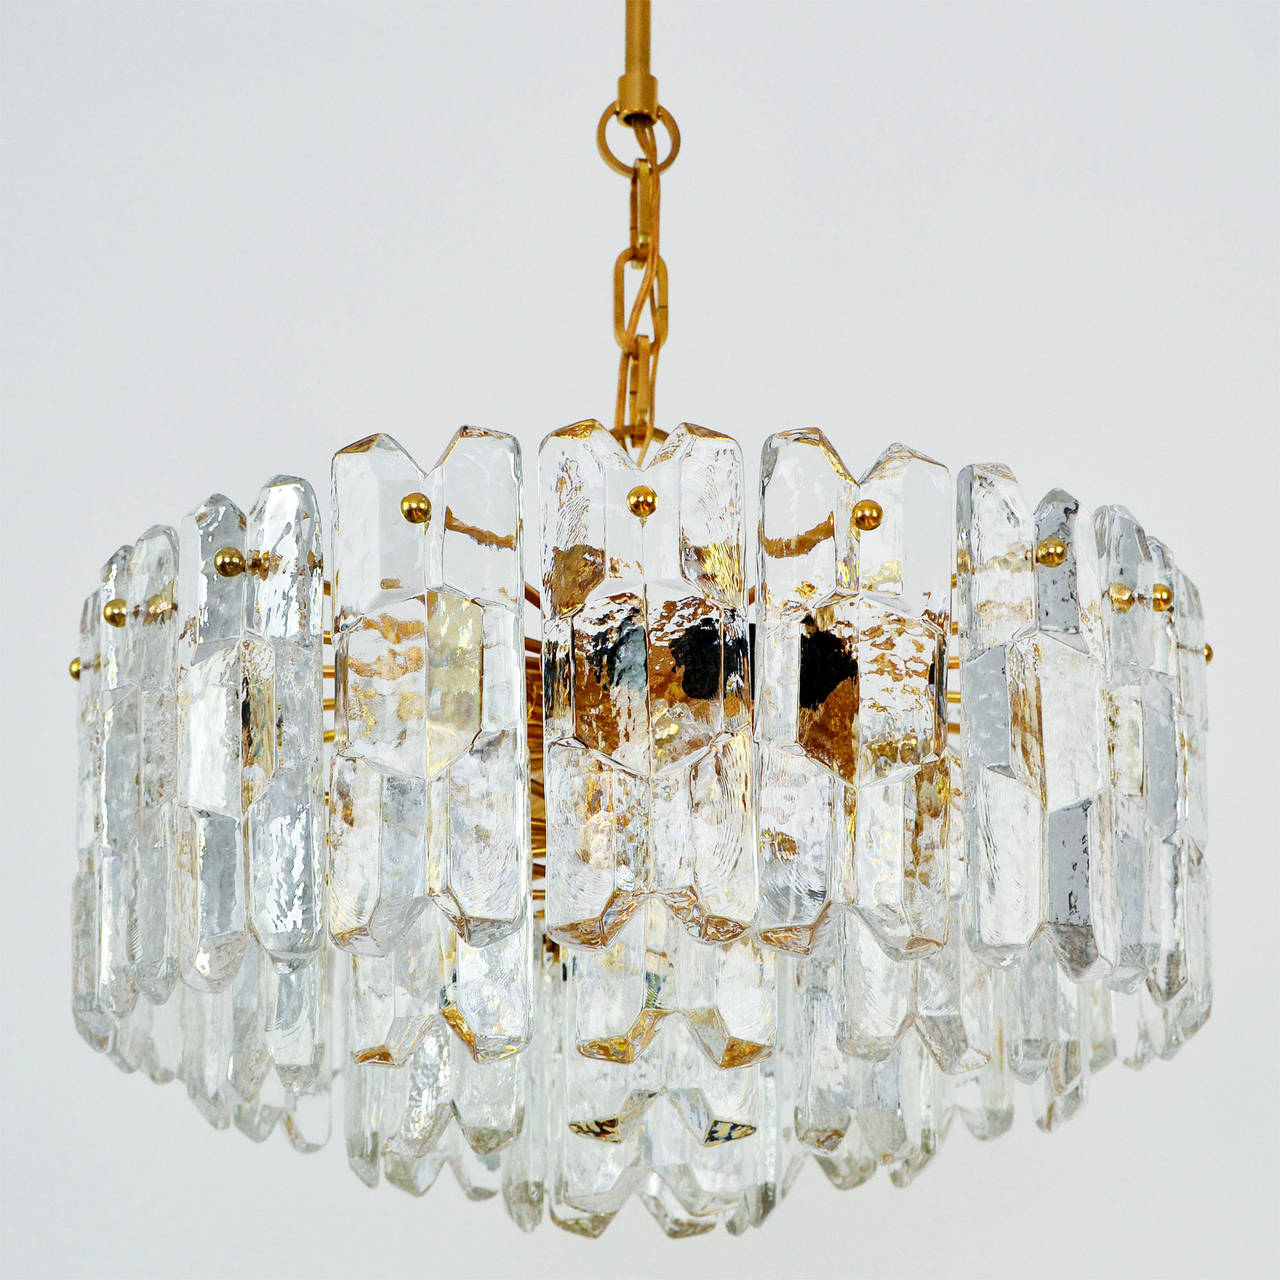 A very exquisit 24-carat gold-plated brass and clear brillant glass 'Palazzo' flush mount lights by J.T. Kalmar, Vienna, Austria, manufactured in circa 1970 (late 1960s and early 1970s). Labeled.
This light is a handmade and high quality piece.